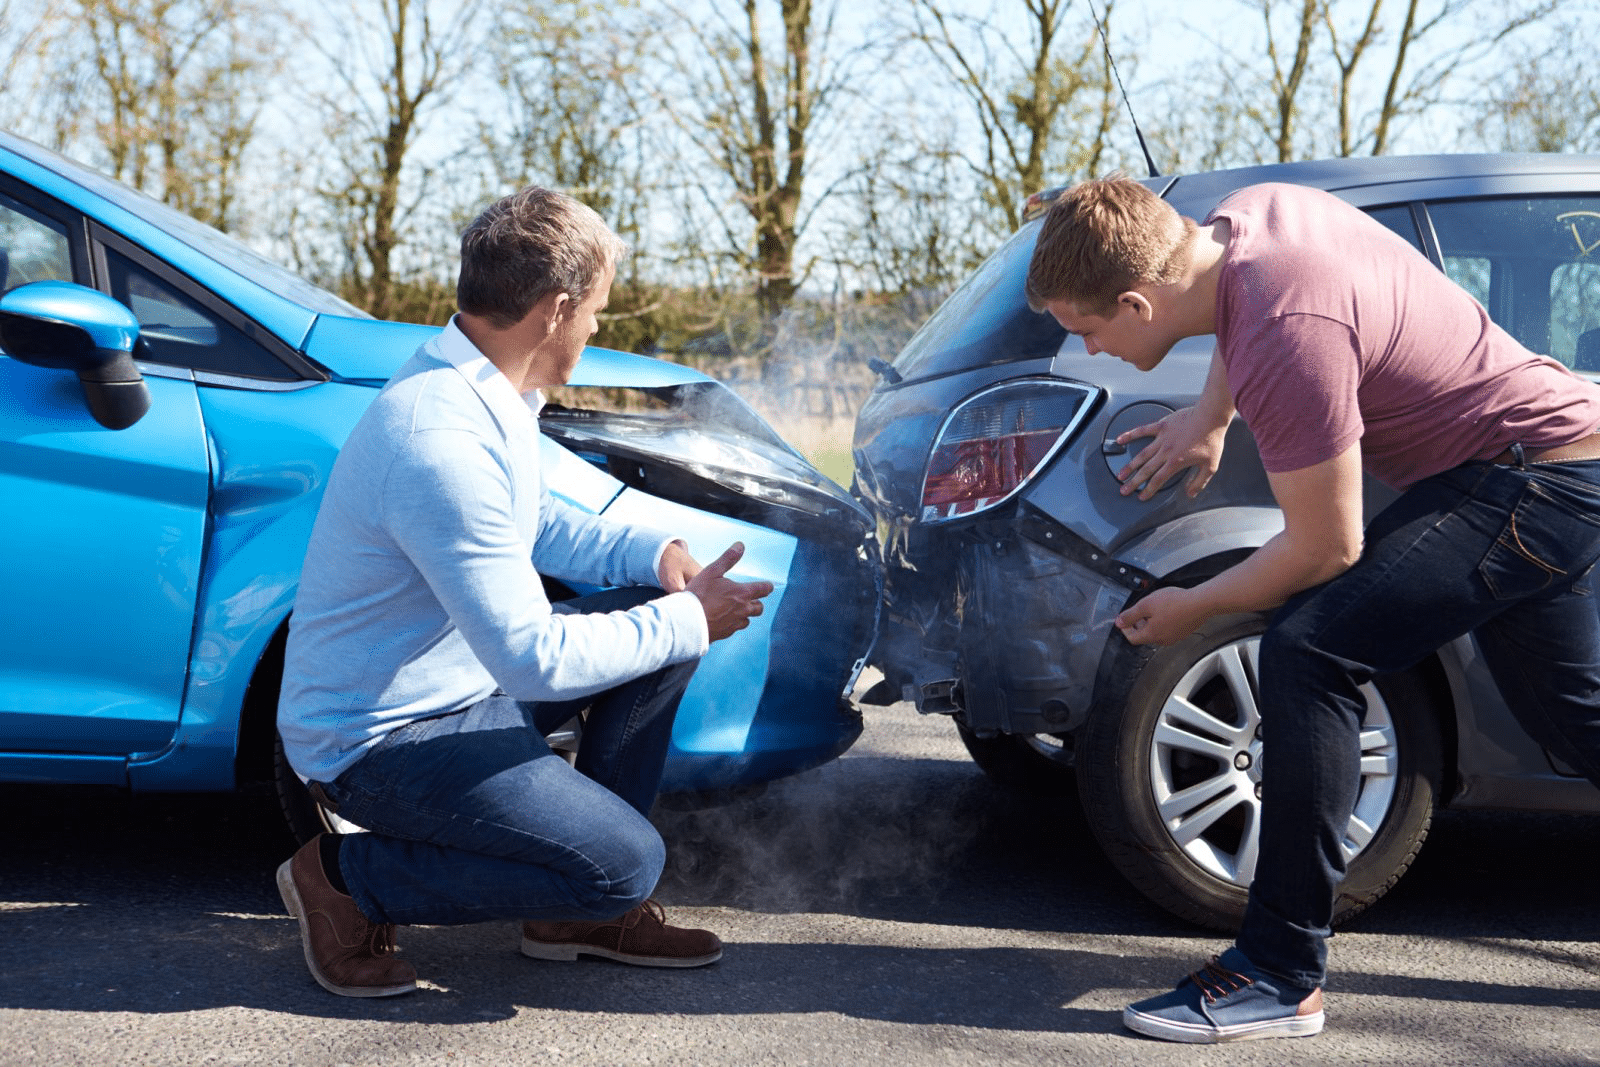 Our compassionate car accident attorneys want you to know exactly what to do and say at the scene of a car wreck.